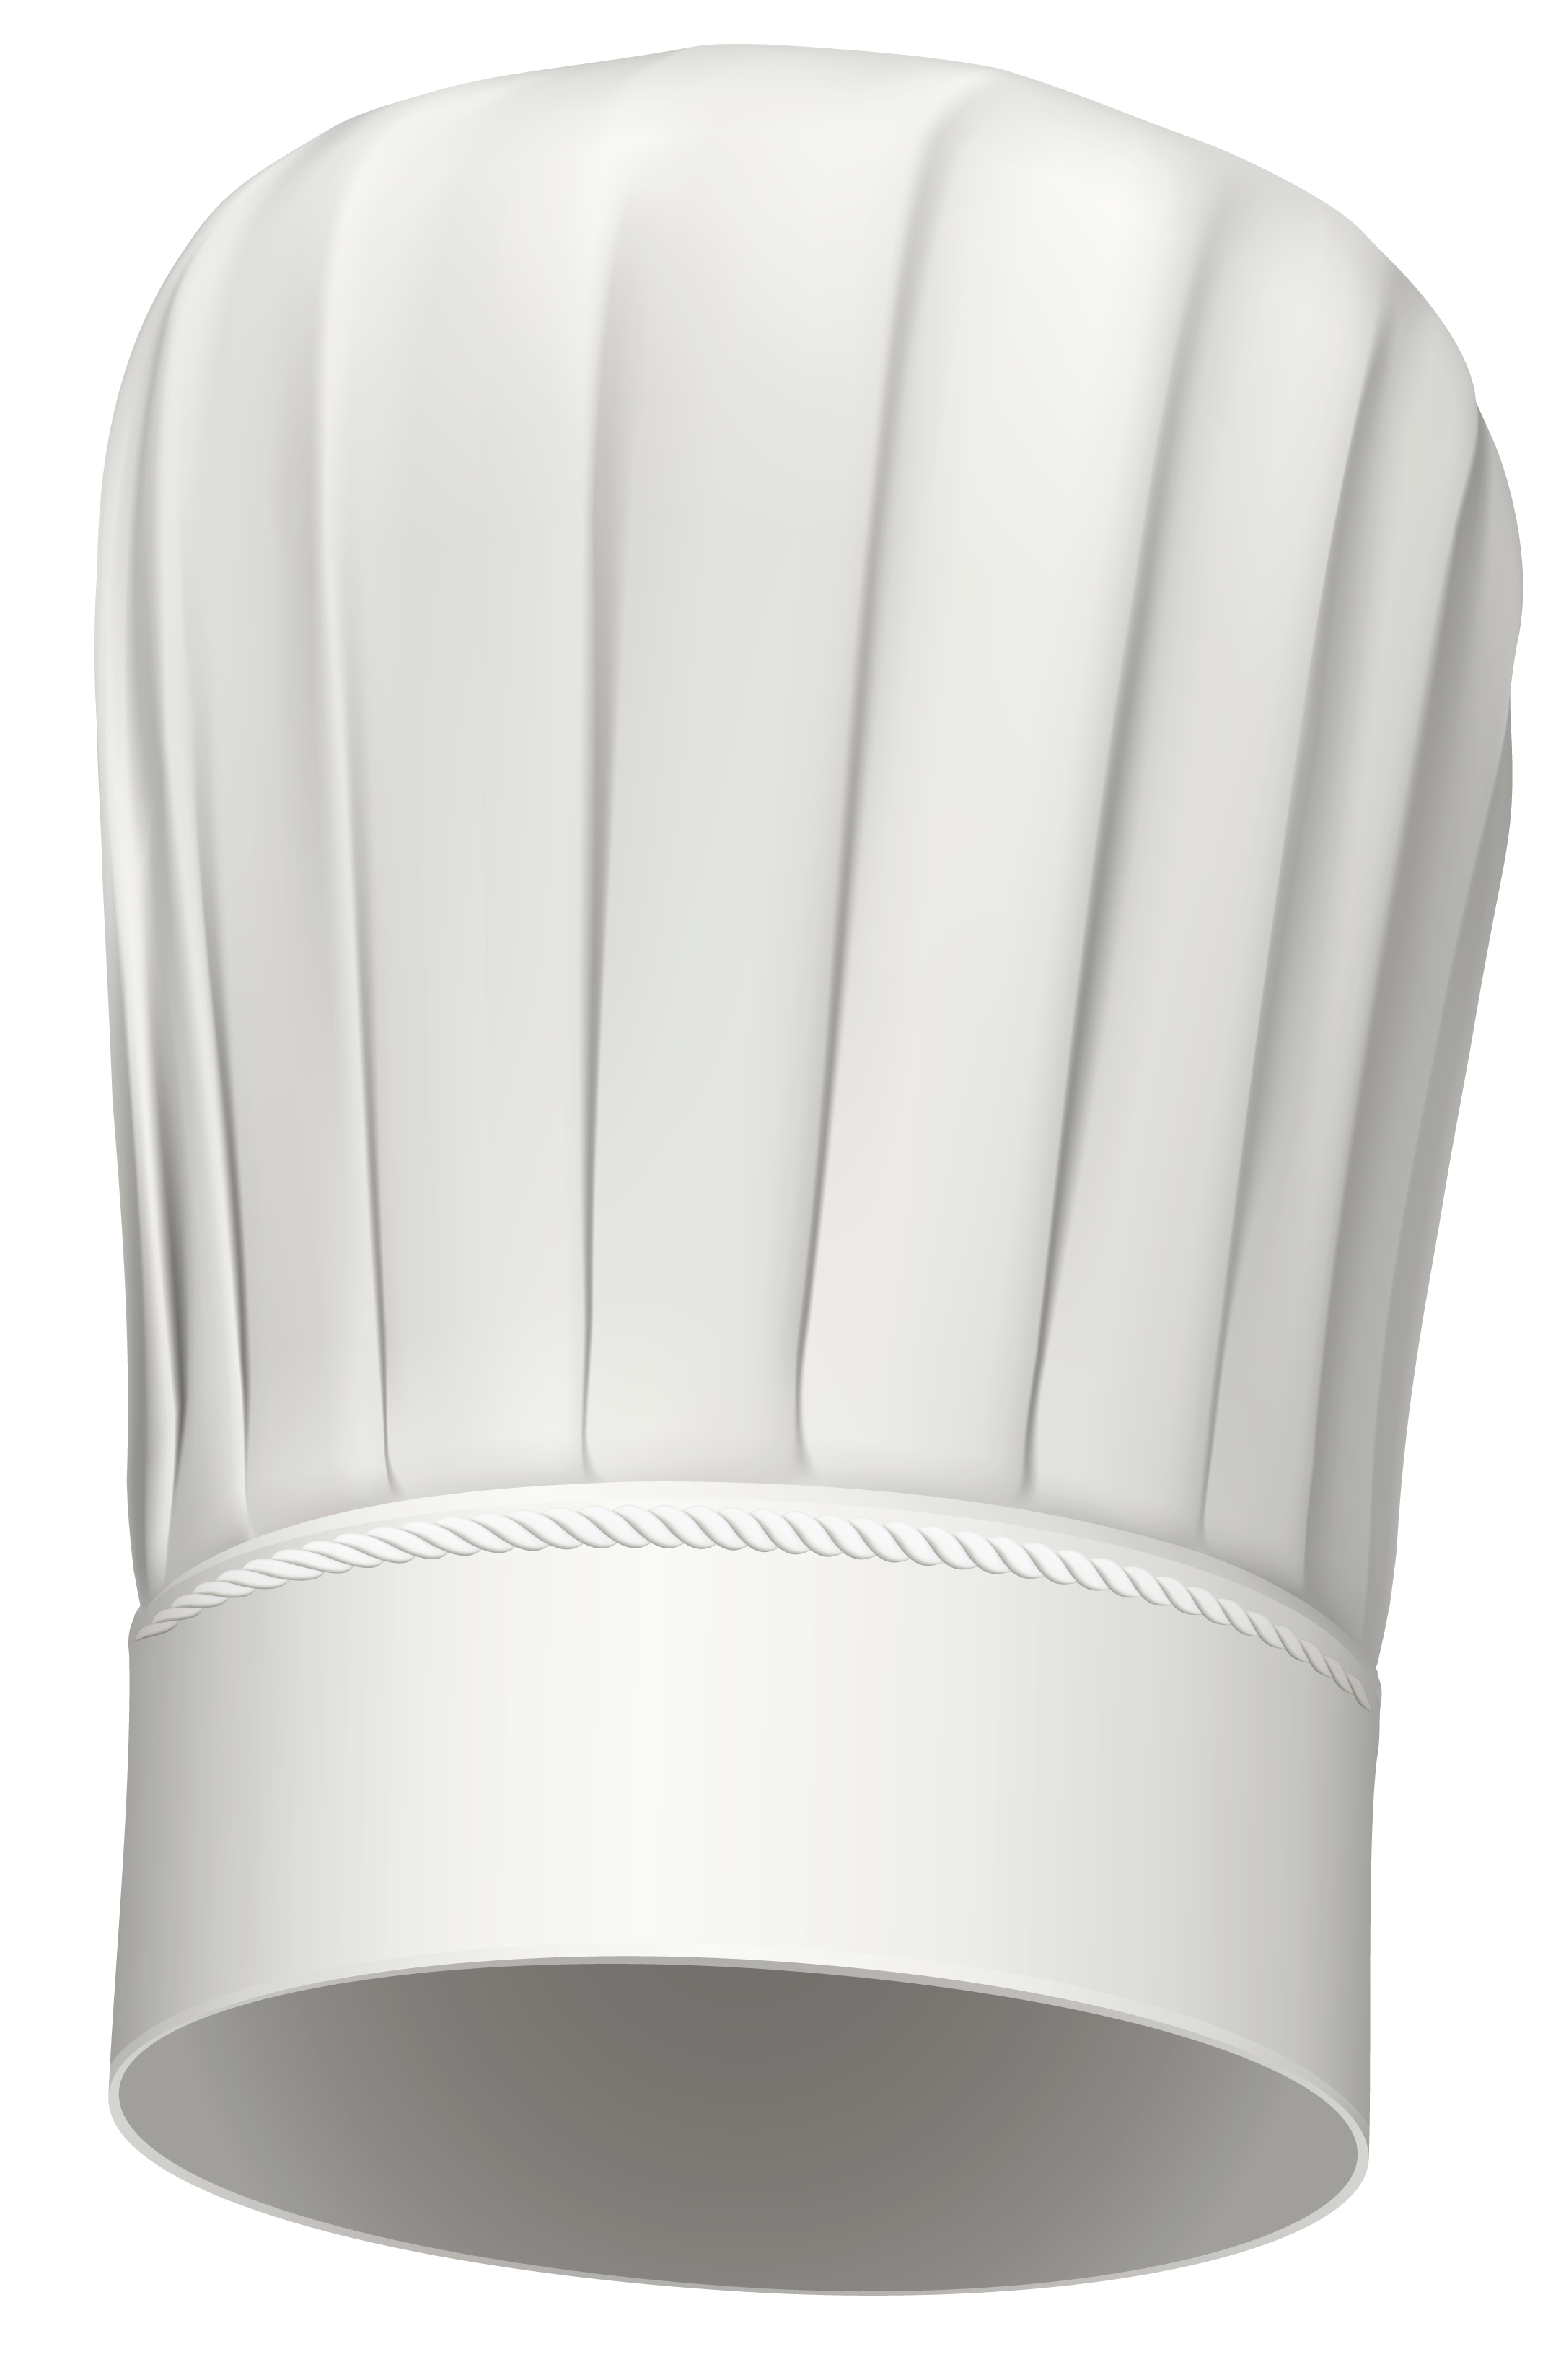 free chef hat clipart images - photo #49